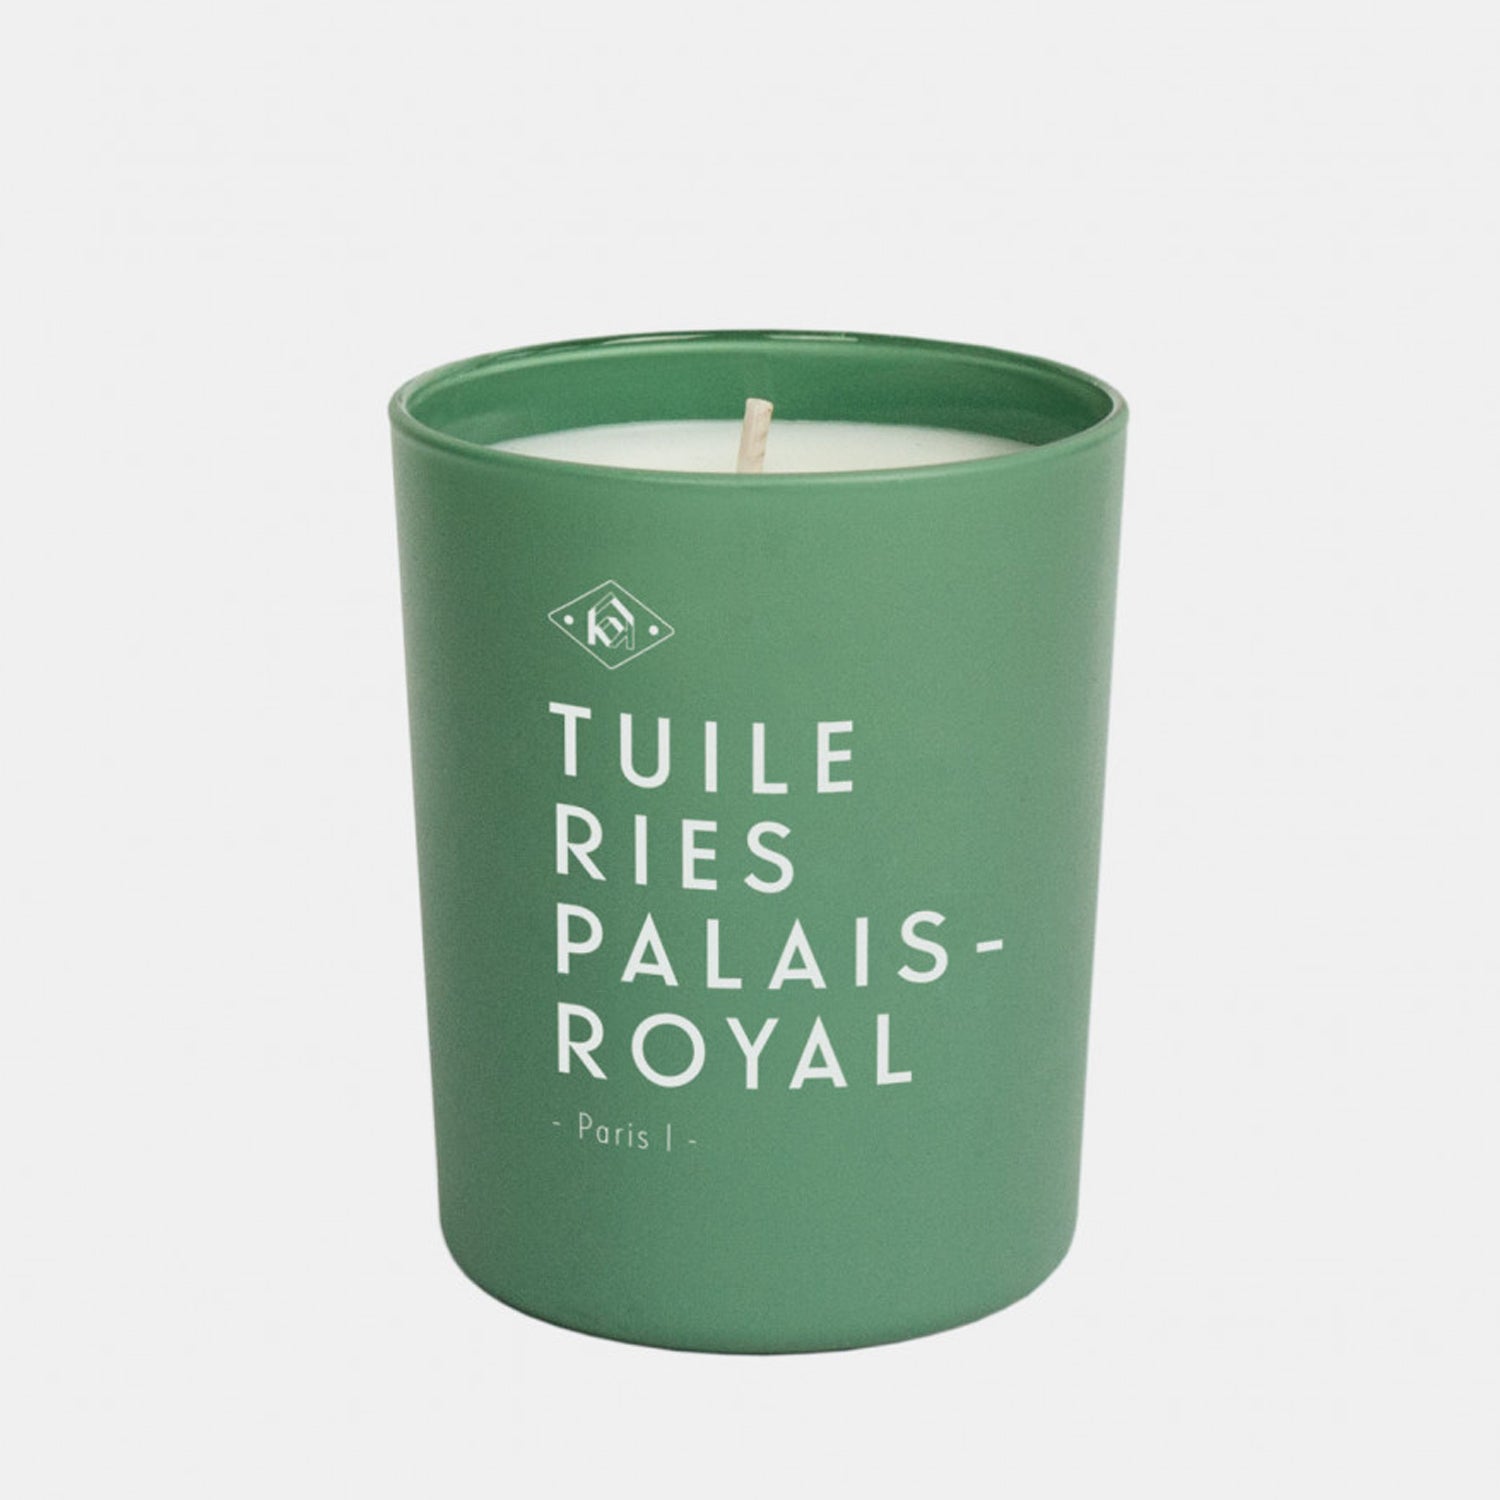 Fragranced Candle - Tuileries Palais-Royal from Kerzon